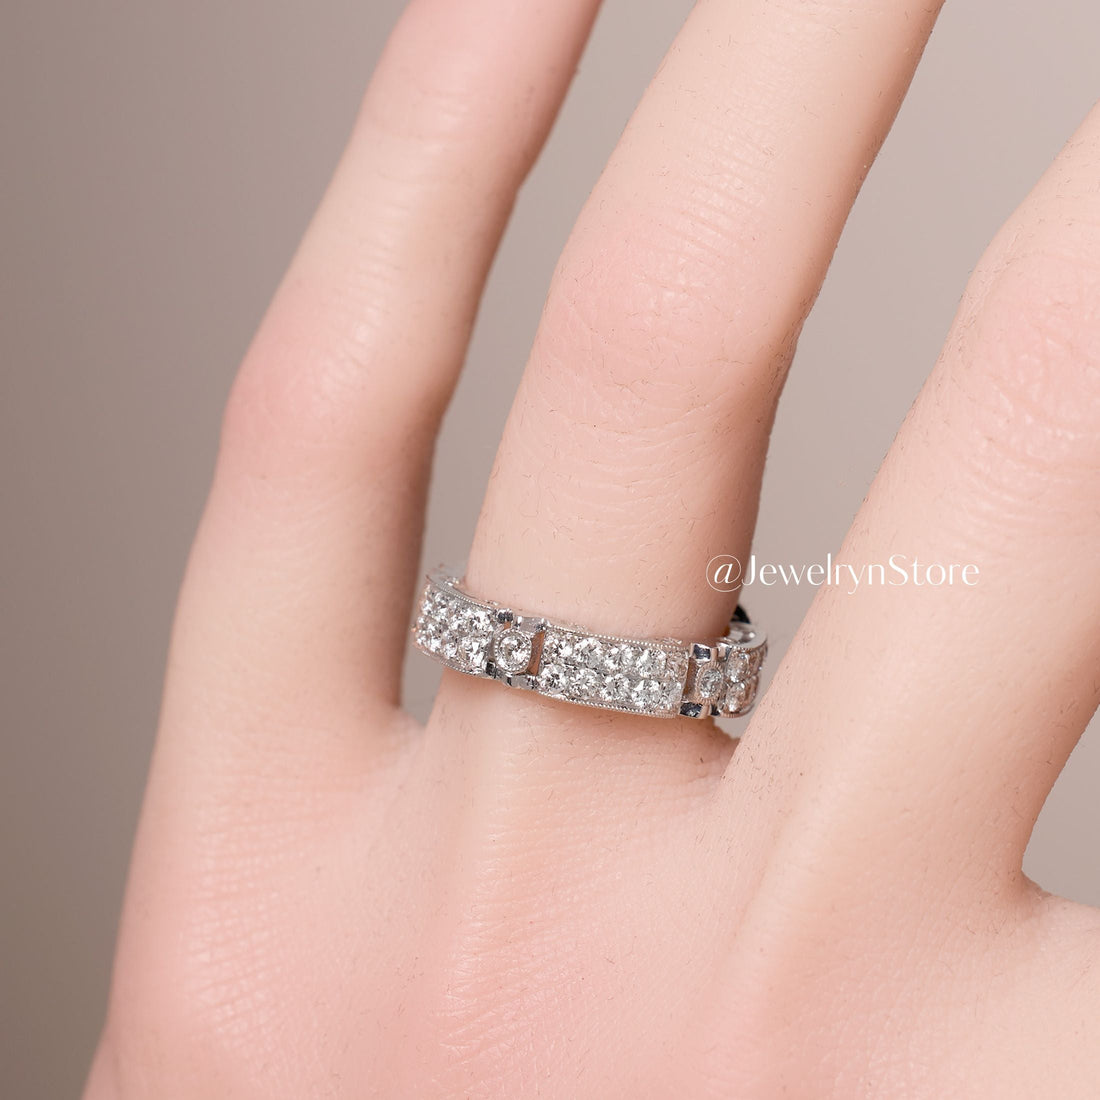 Vintage-Styled Diamond Stackable Band